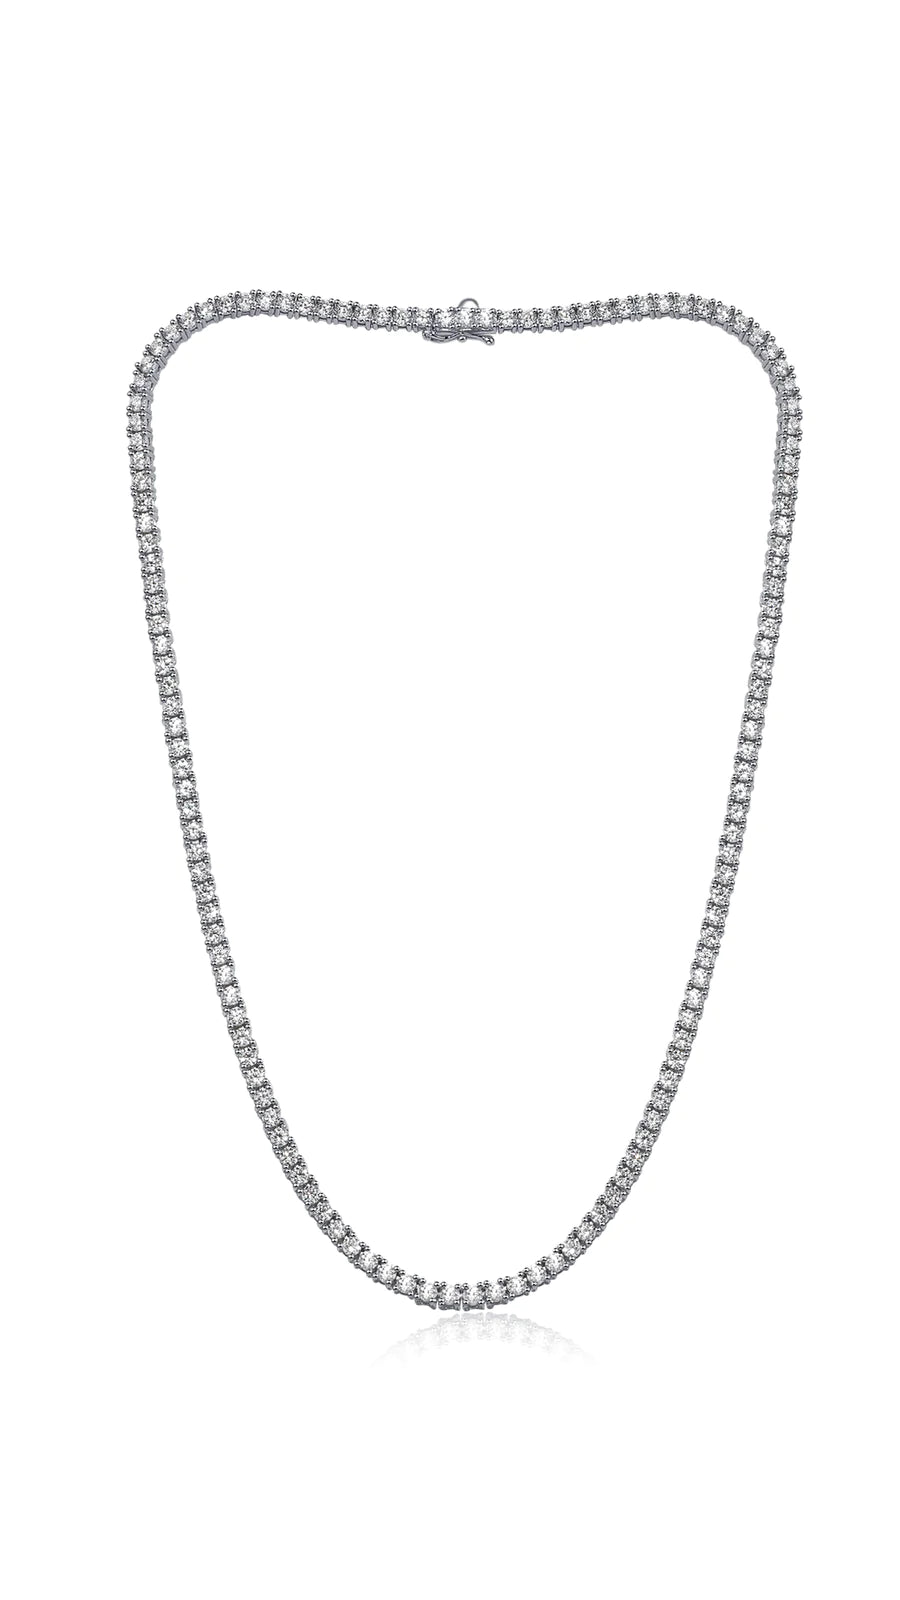 Silver Tennis Necklace 2.5mm Stone